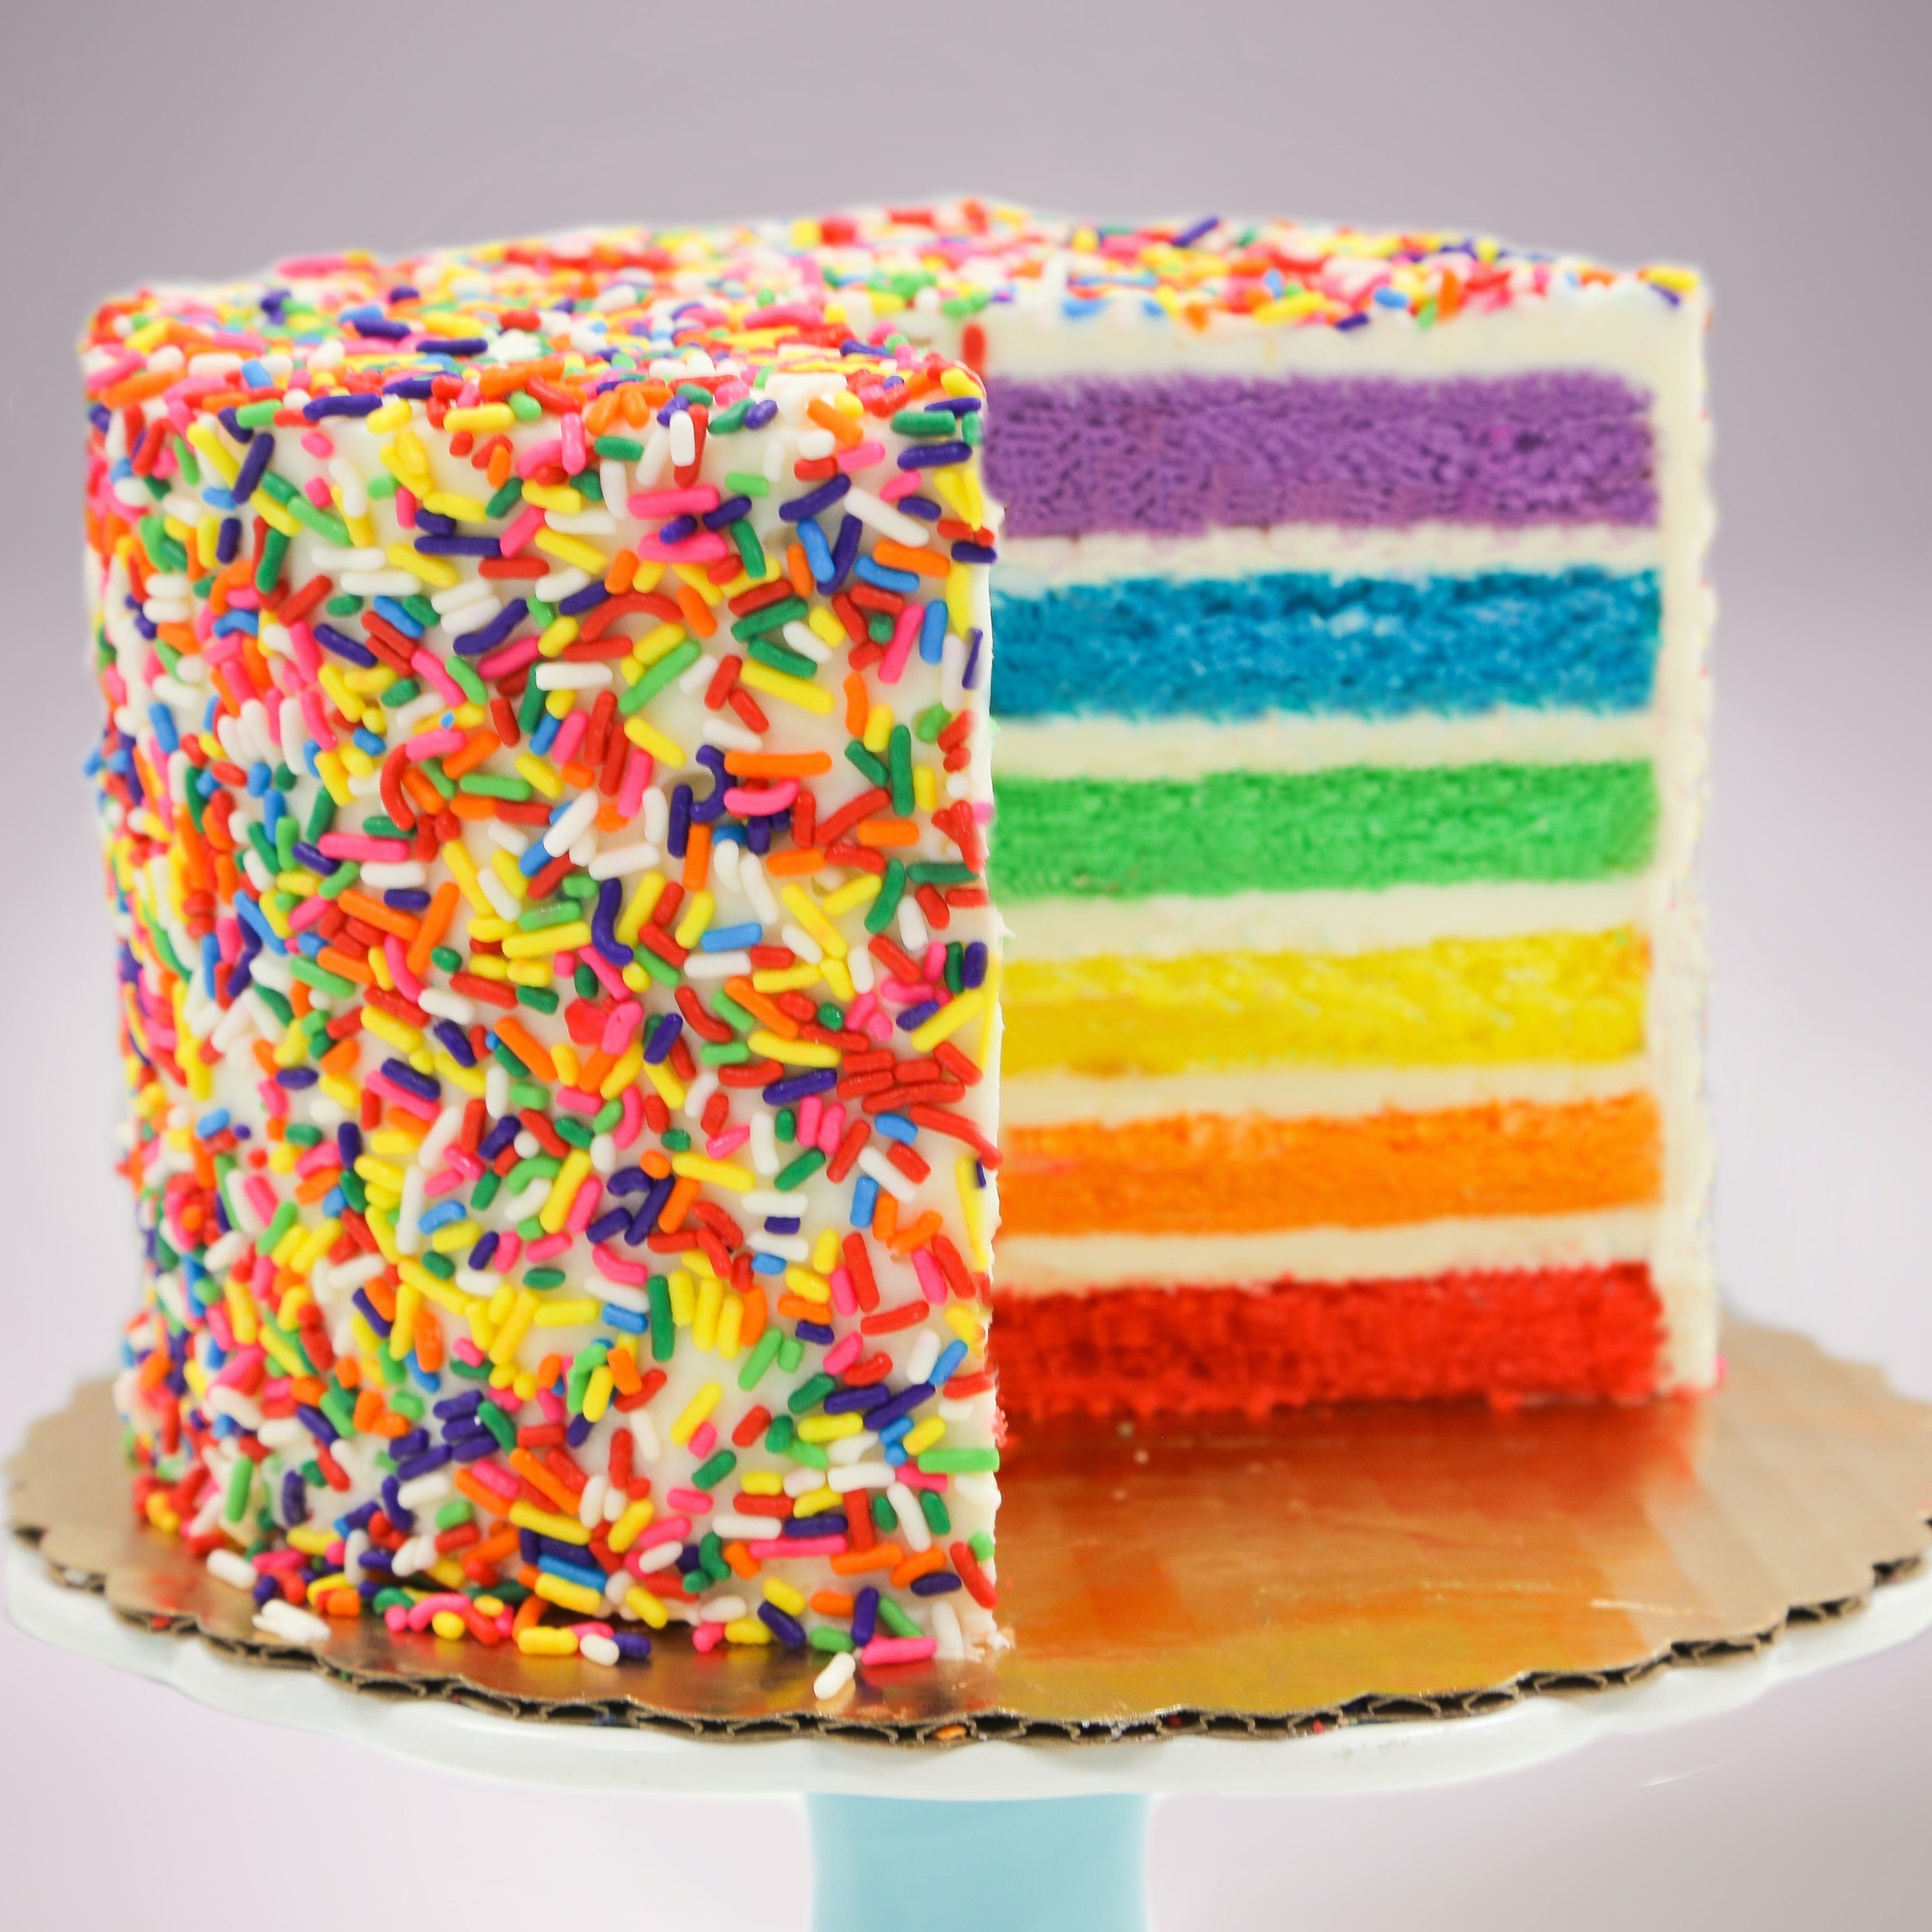 A rainbow-sprinkled cake layered with different rainbow colors